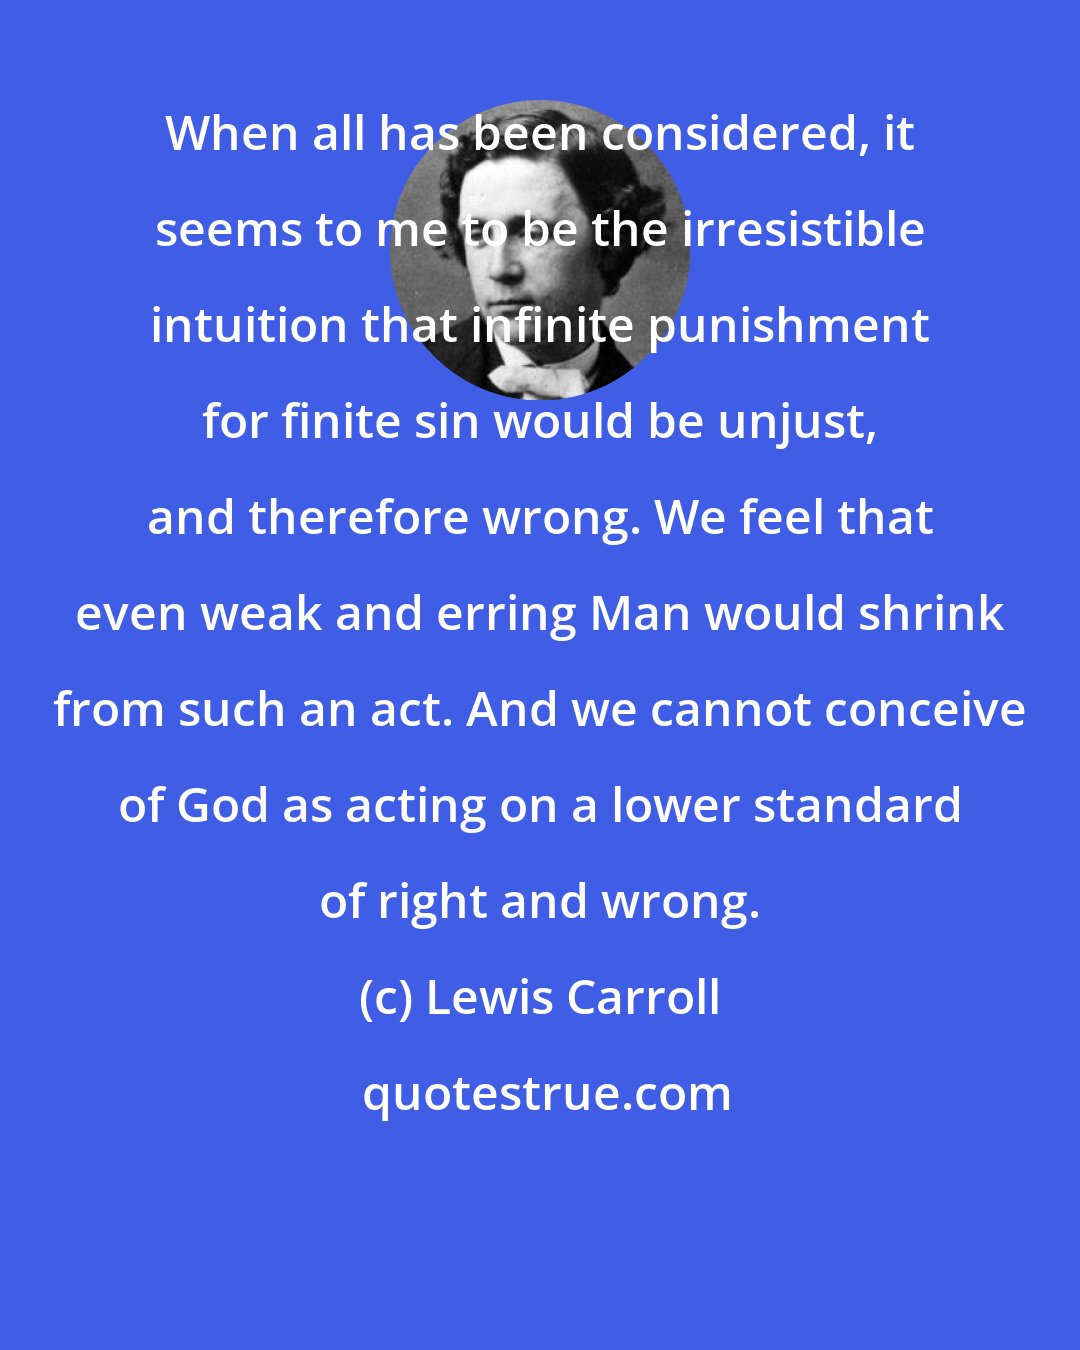 Lewis Carroll: When all has been considered, it seems to me to be the irresistible intuition that infinite punishment for finite sin would be unjust, and therefore wrong. We feel that even weak and erring Man would shrink from such an act. And we cannot conceive of God as acting on a lower standard of right and wrong.